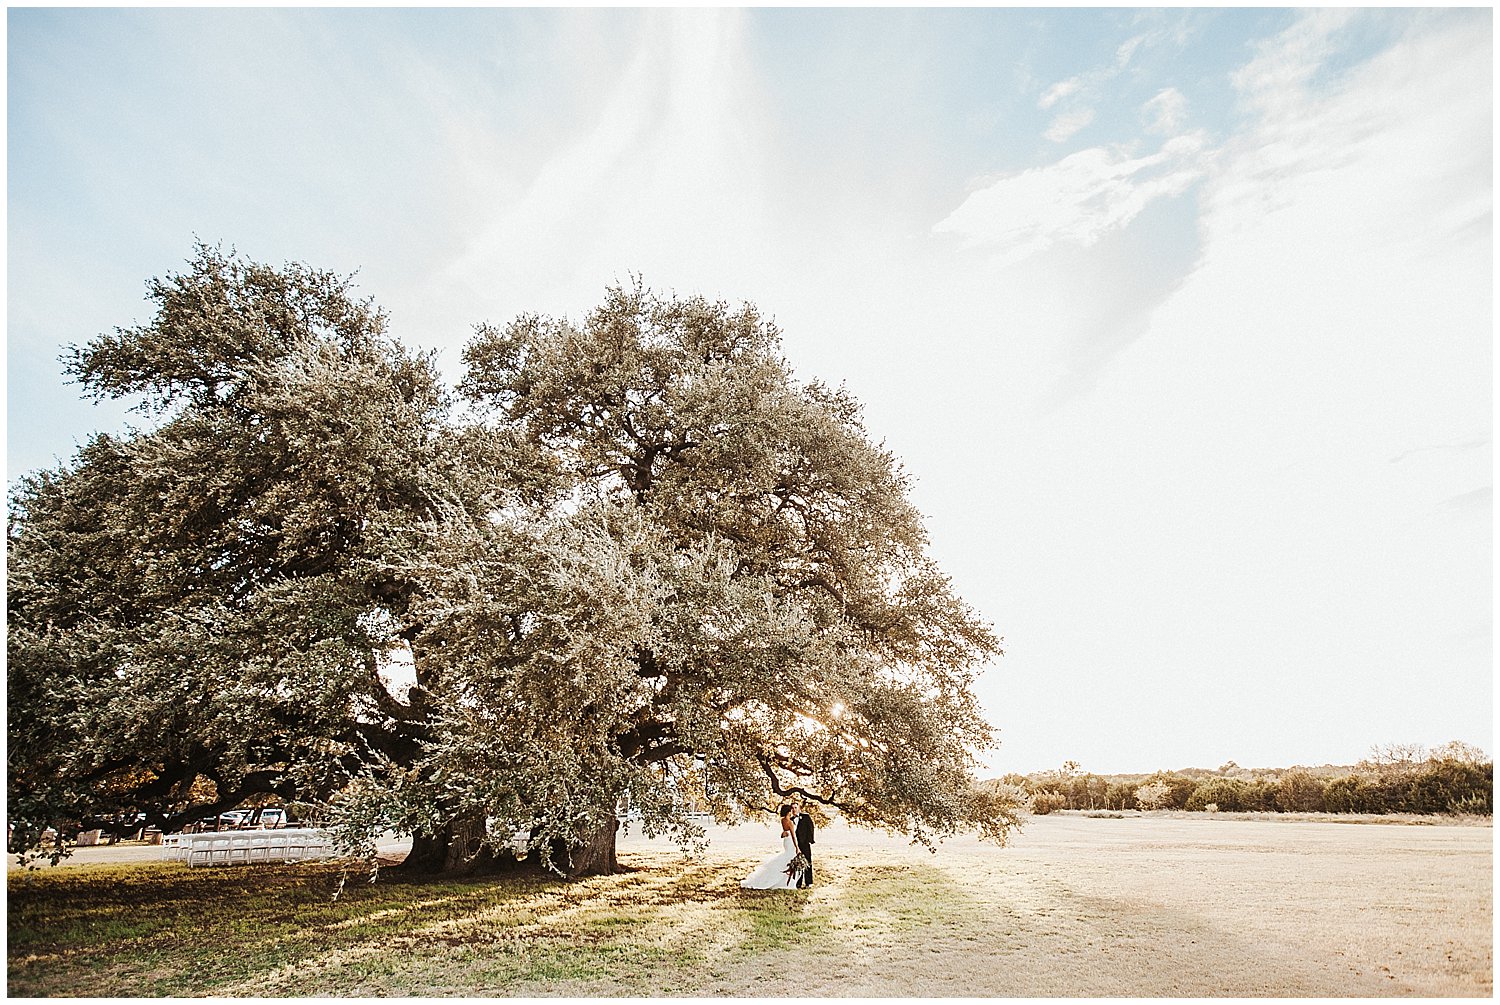 A landscape frame of a bride and groom posing near a tree